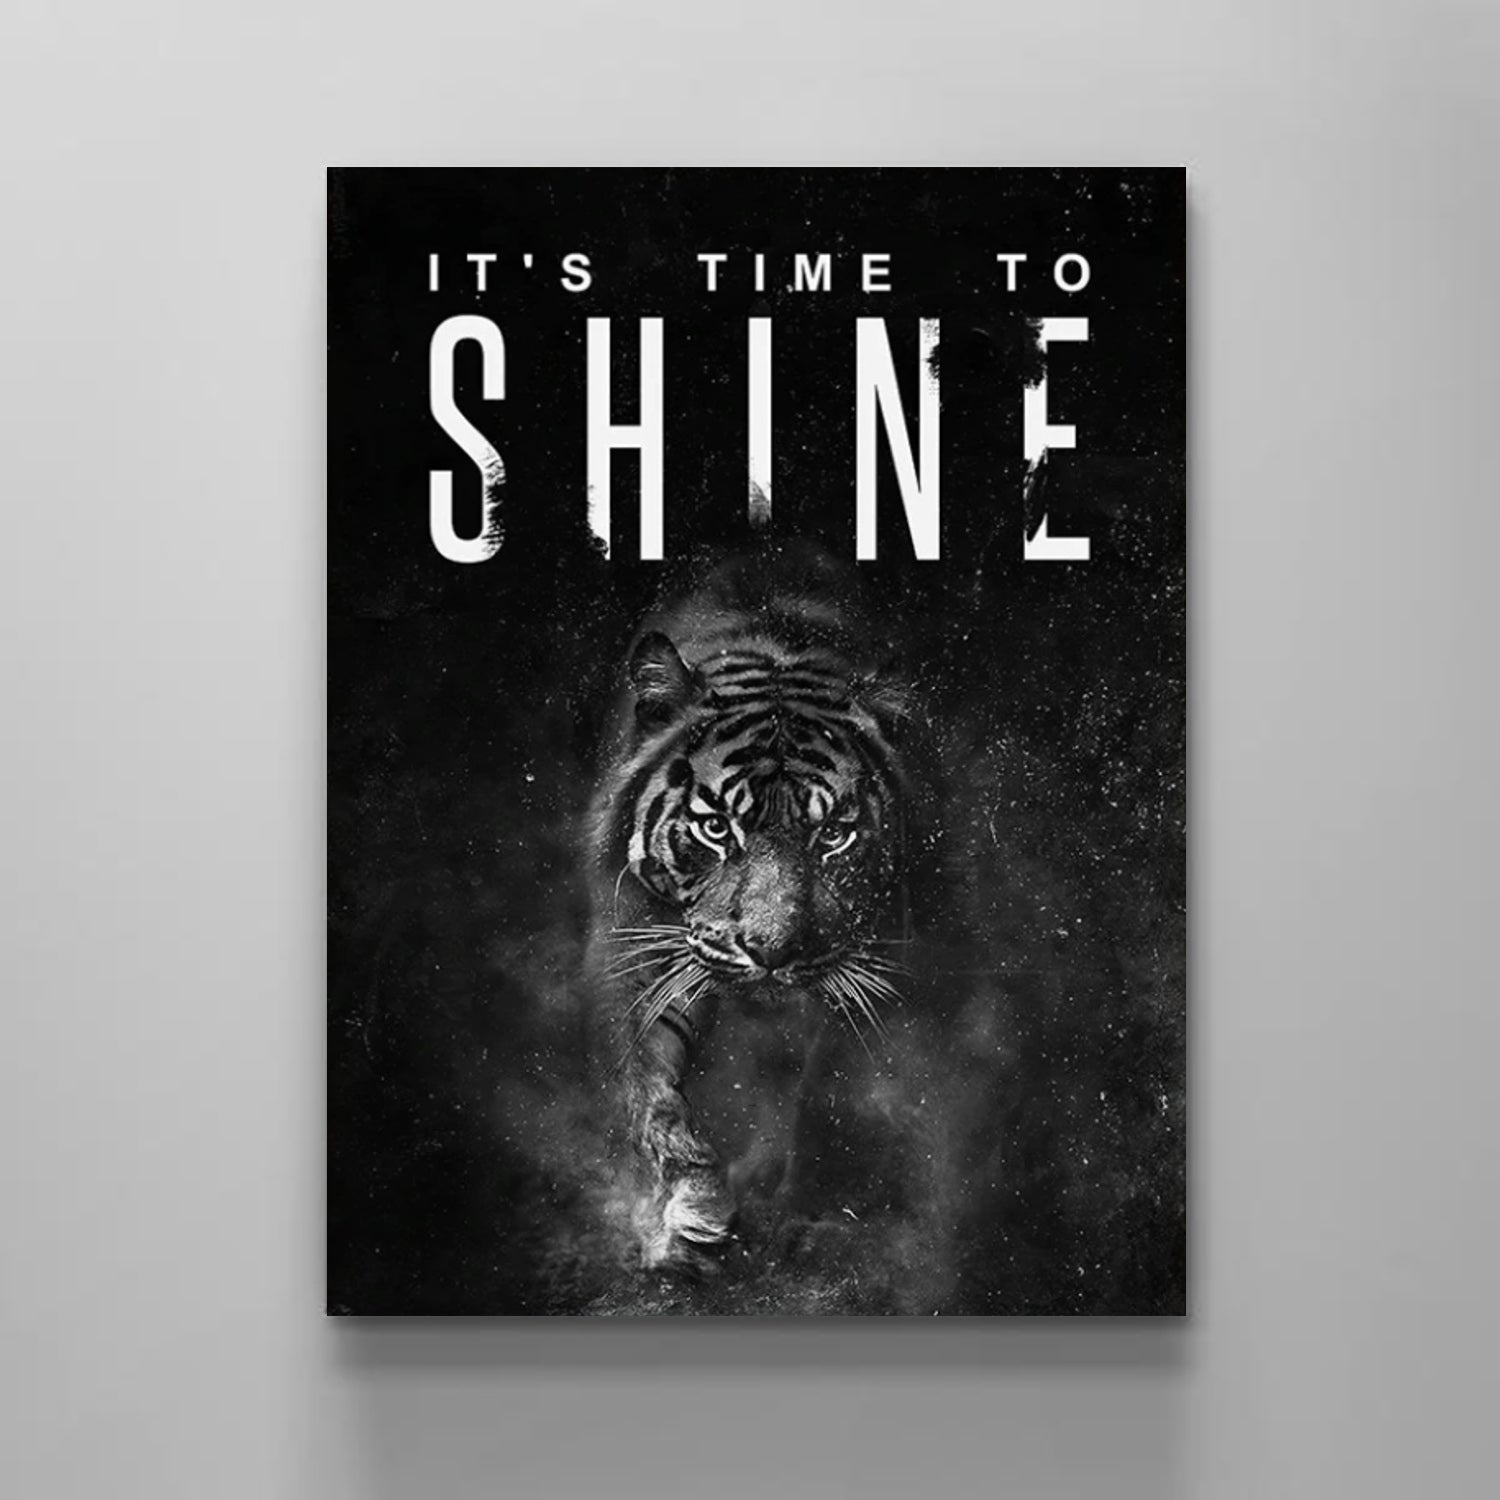 It's Your Time to Shine